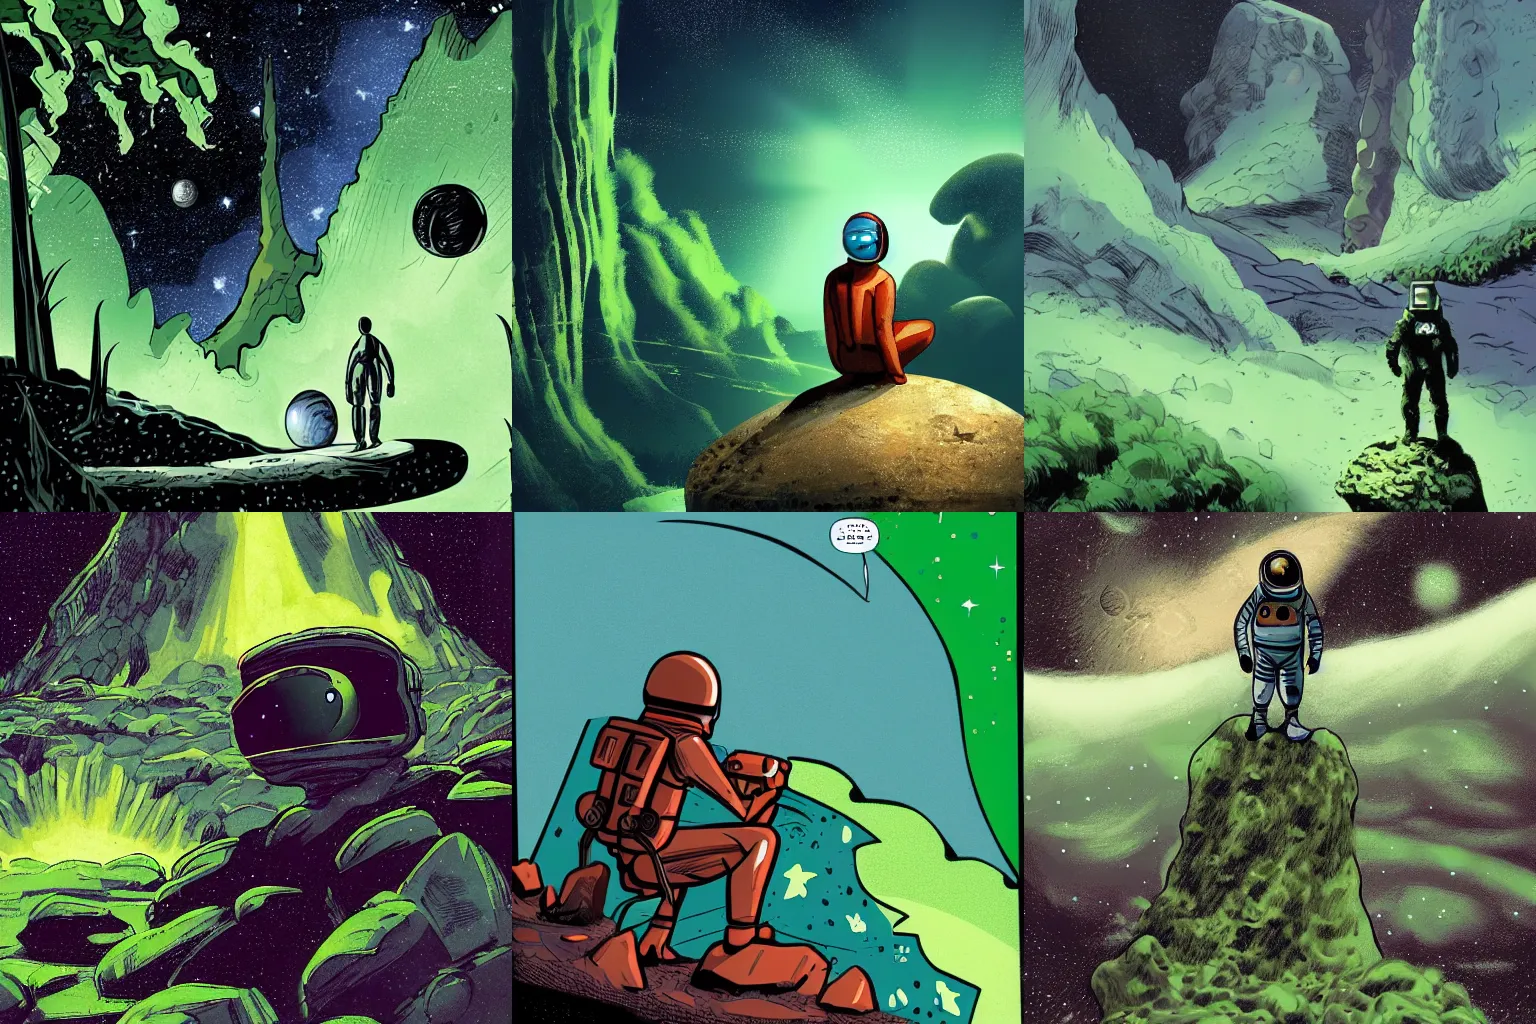 Prompt: Space landscape of another planet, a man in a spacesuit sits on a stone and looks at a green waterfall, comics style